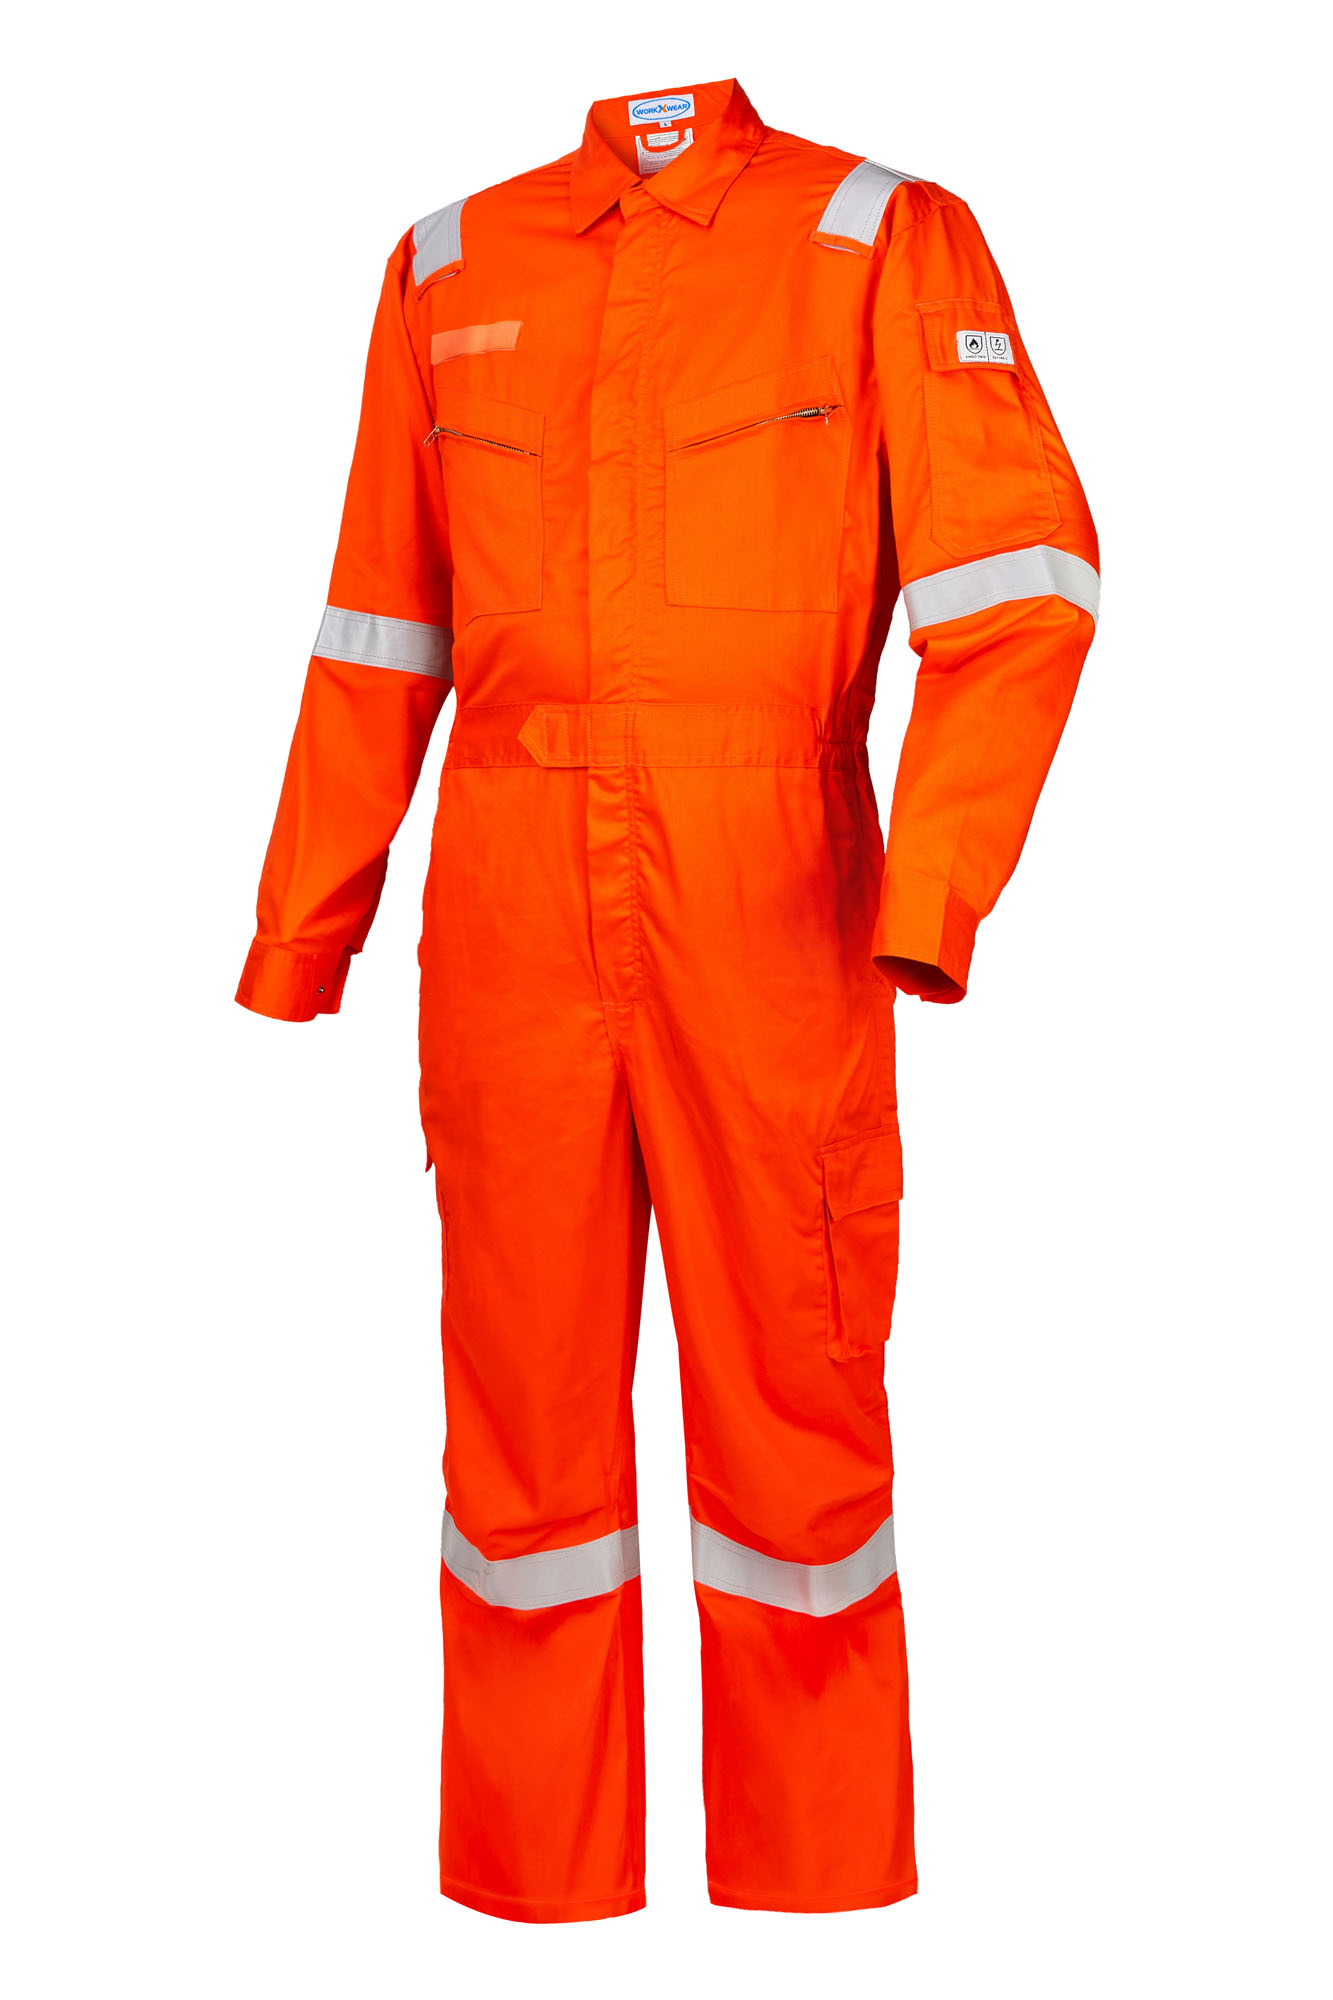 Hi Care safety solutions is Manufacturers and Suppliers of Ifr coverall in  Mumbai,India